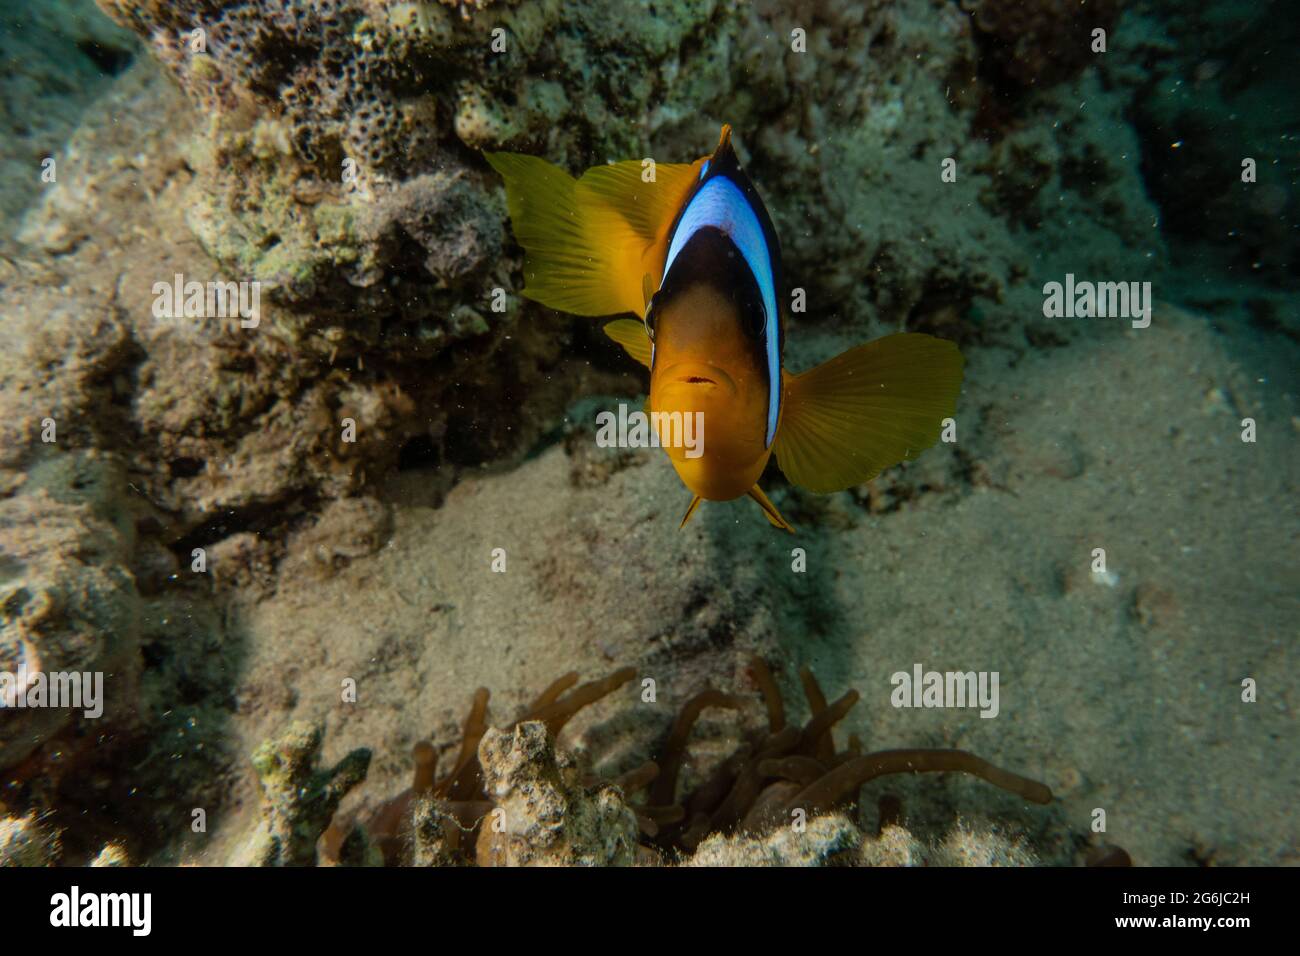 Clownfish in the Red Sea Colorful and beautiful, Eilat Israel Stock Photo